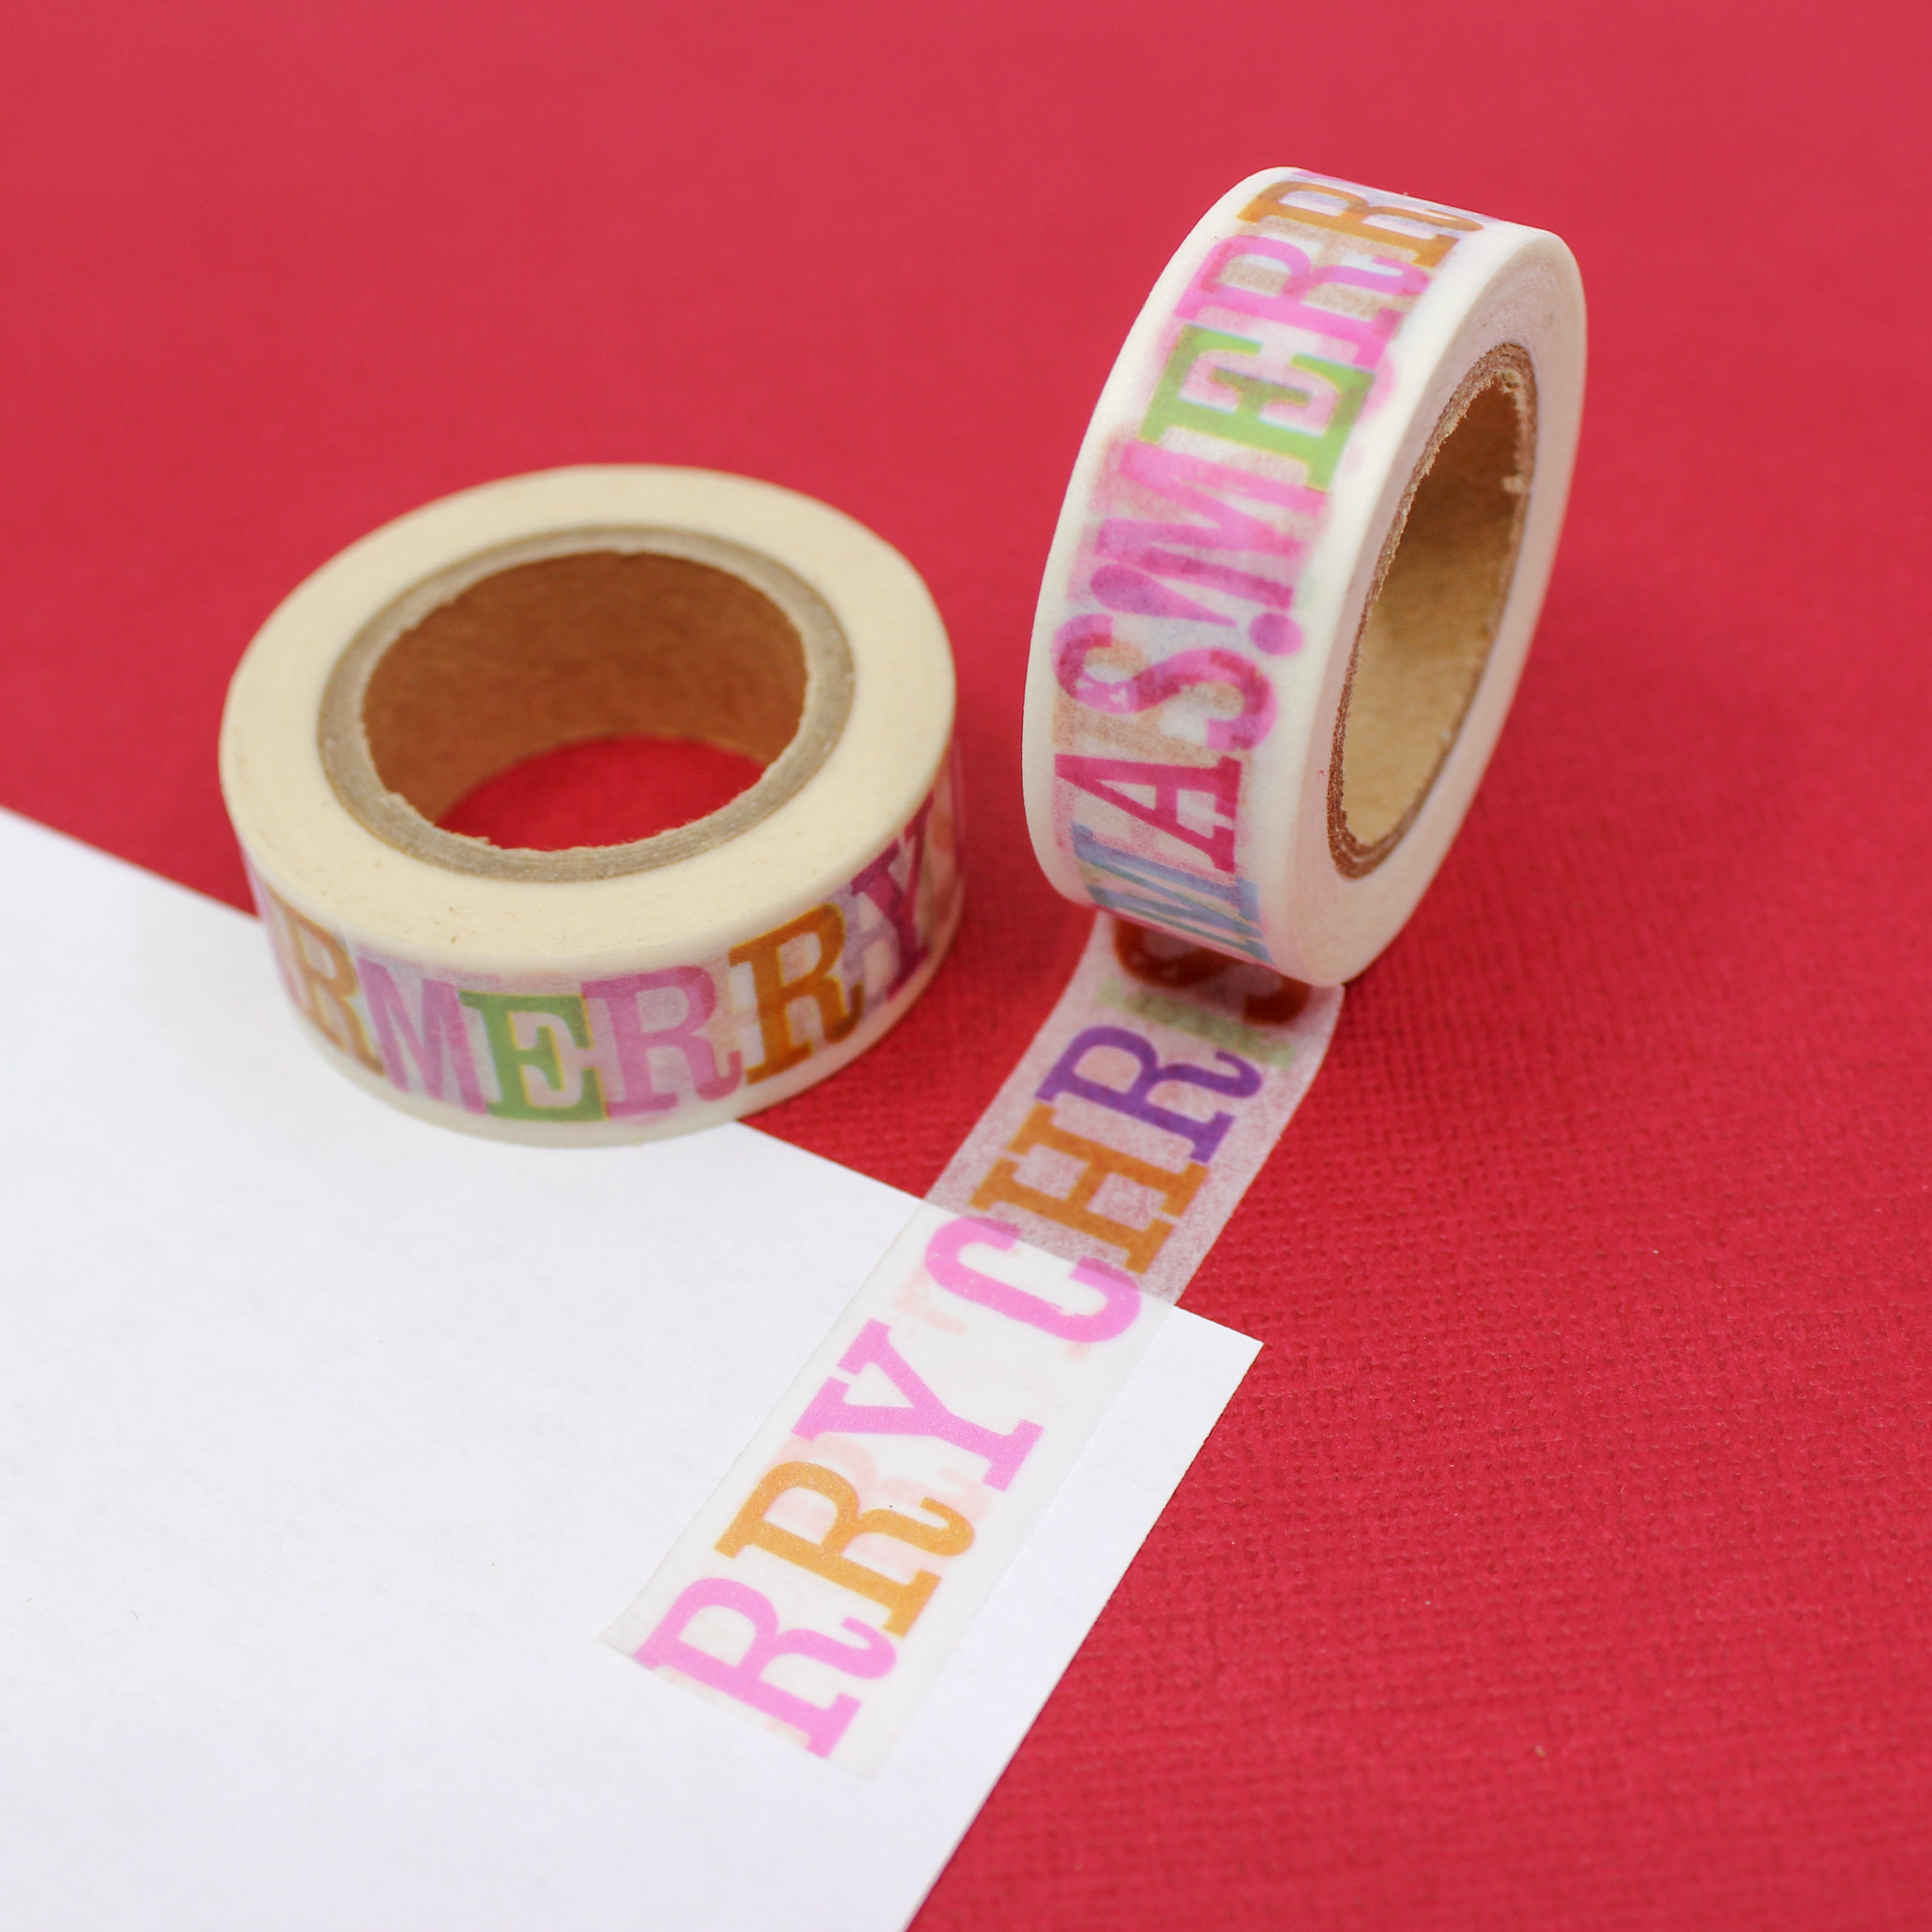 This is a colorful block letters of Merry Christmas text or greetings pattern Washi Tape from BBB Supplies Craft Shop